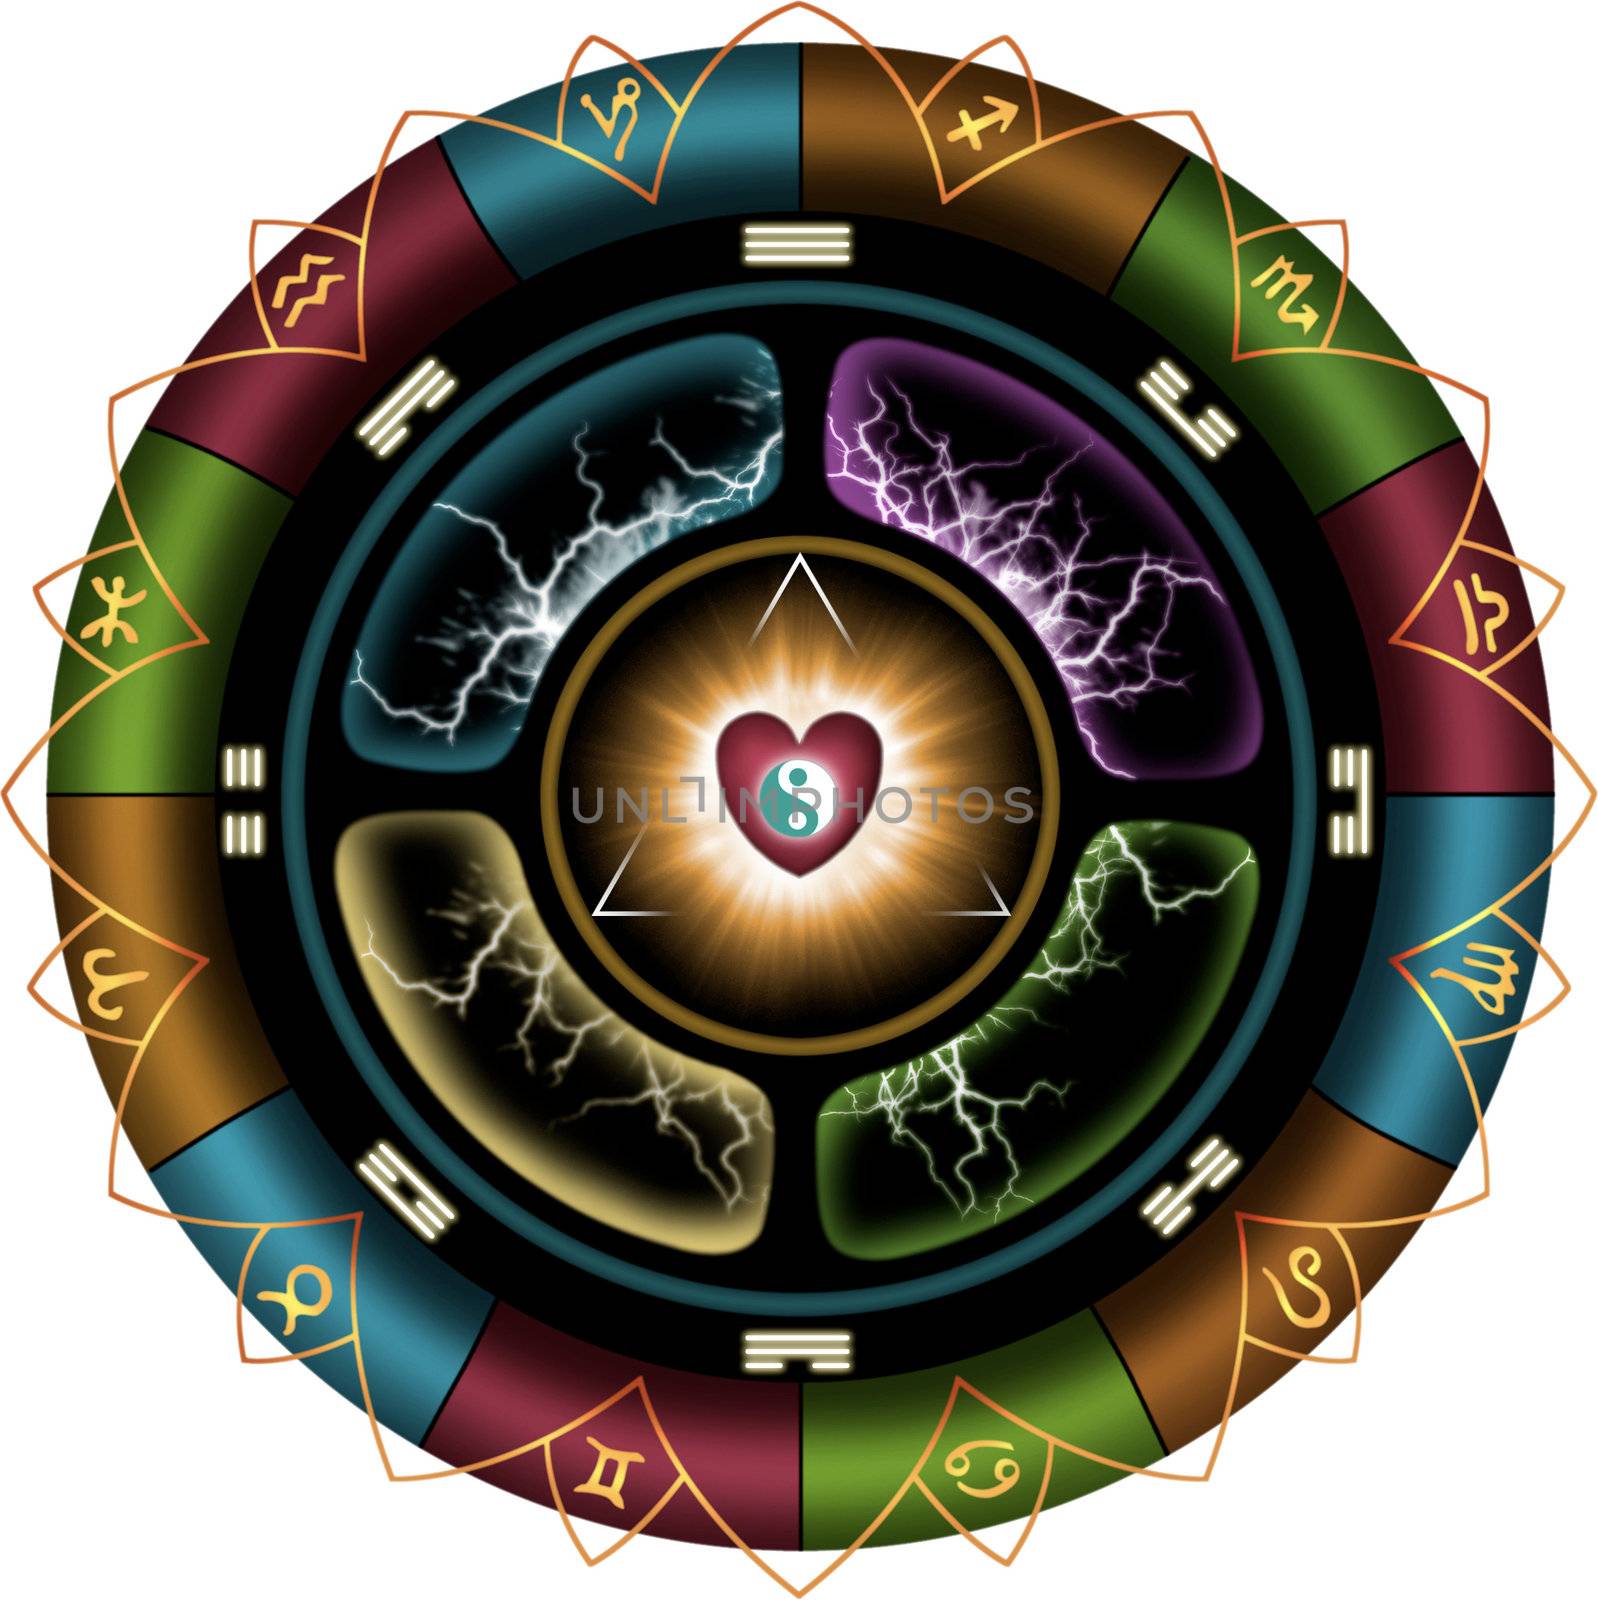 The love Wheel by watchtheworld